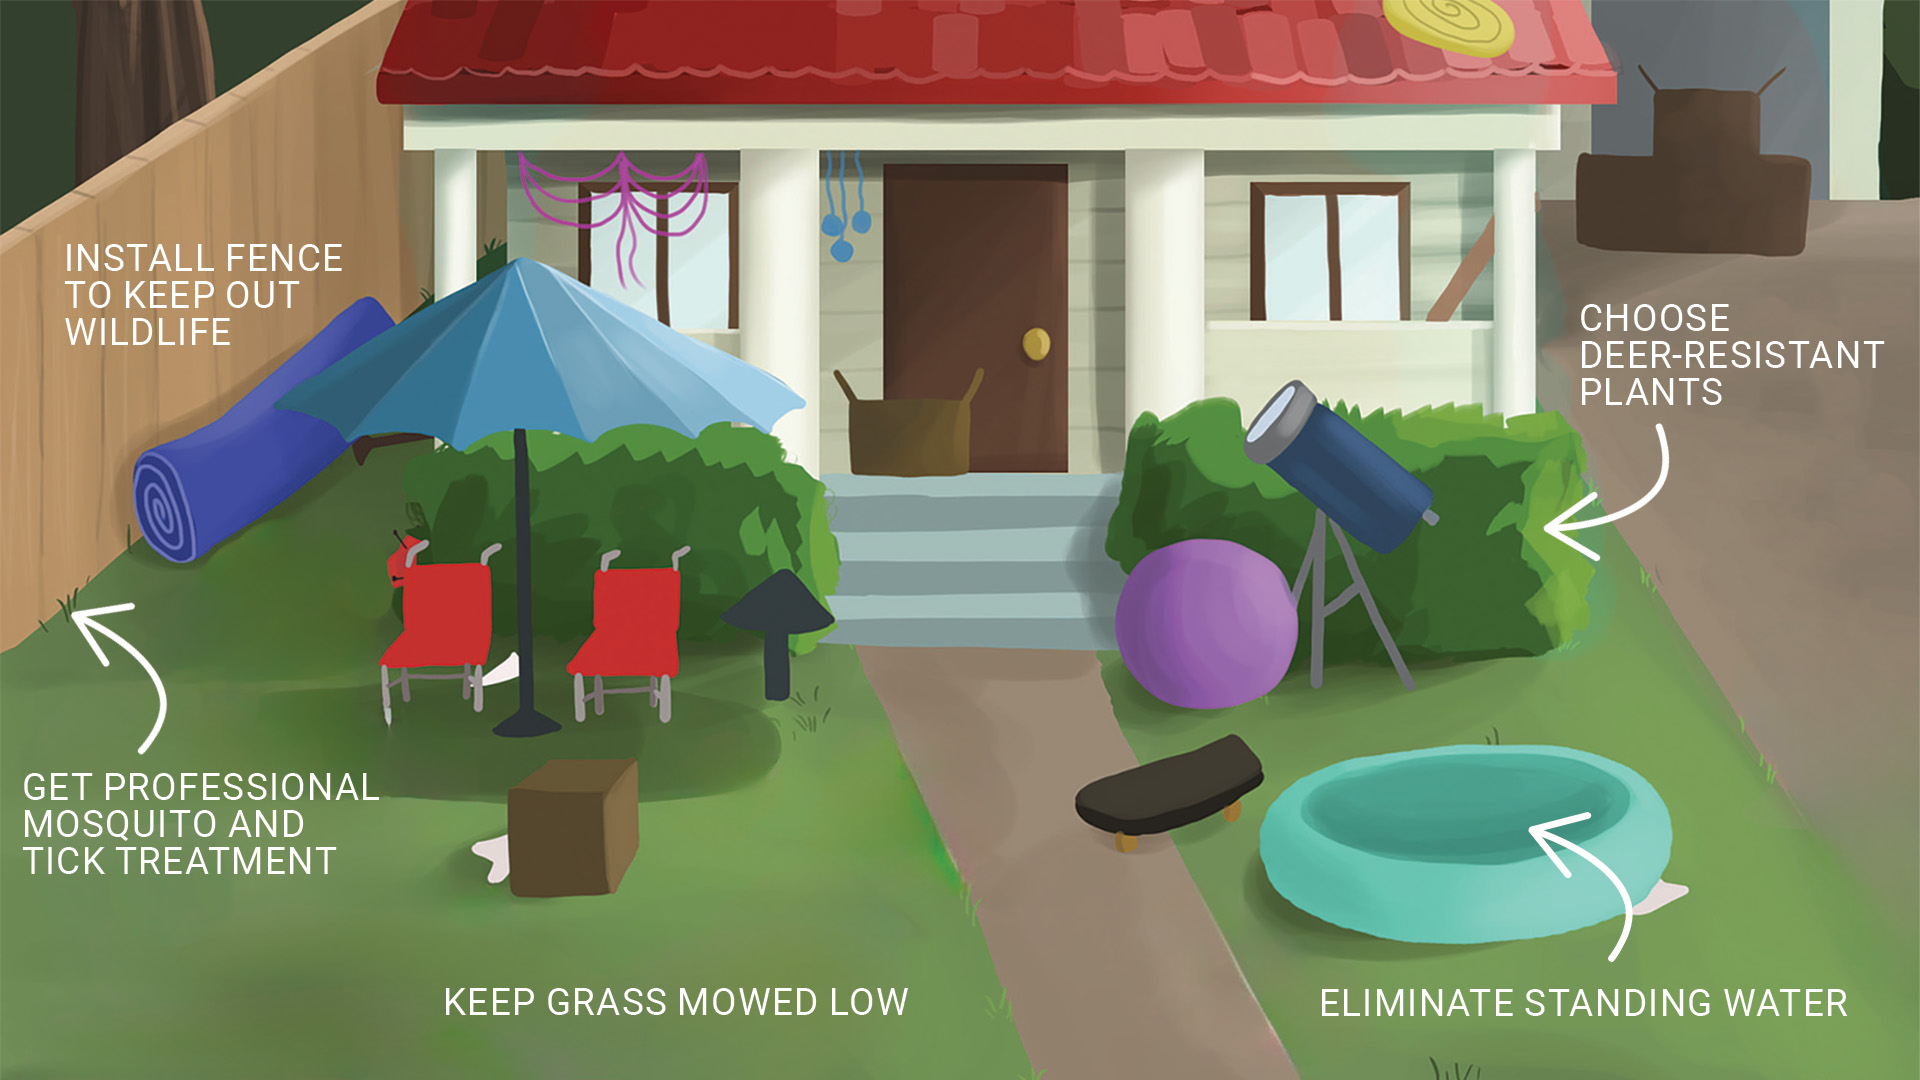 Infographic of a home featuring tips to reduce the incidence of ticks and mosquitoes on property